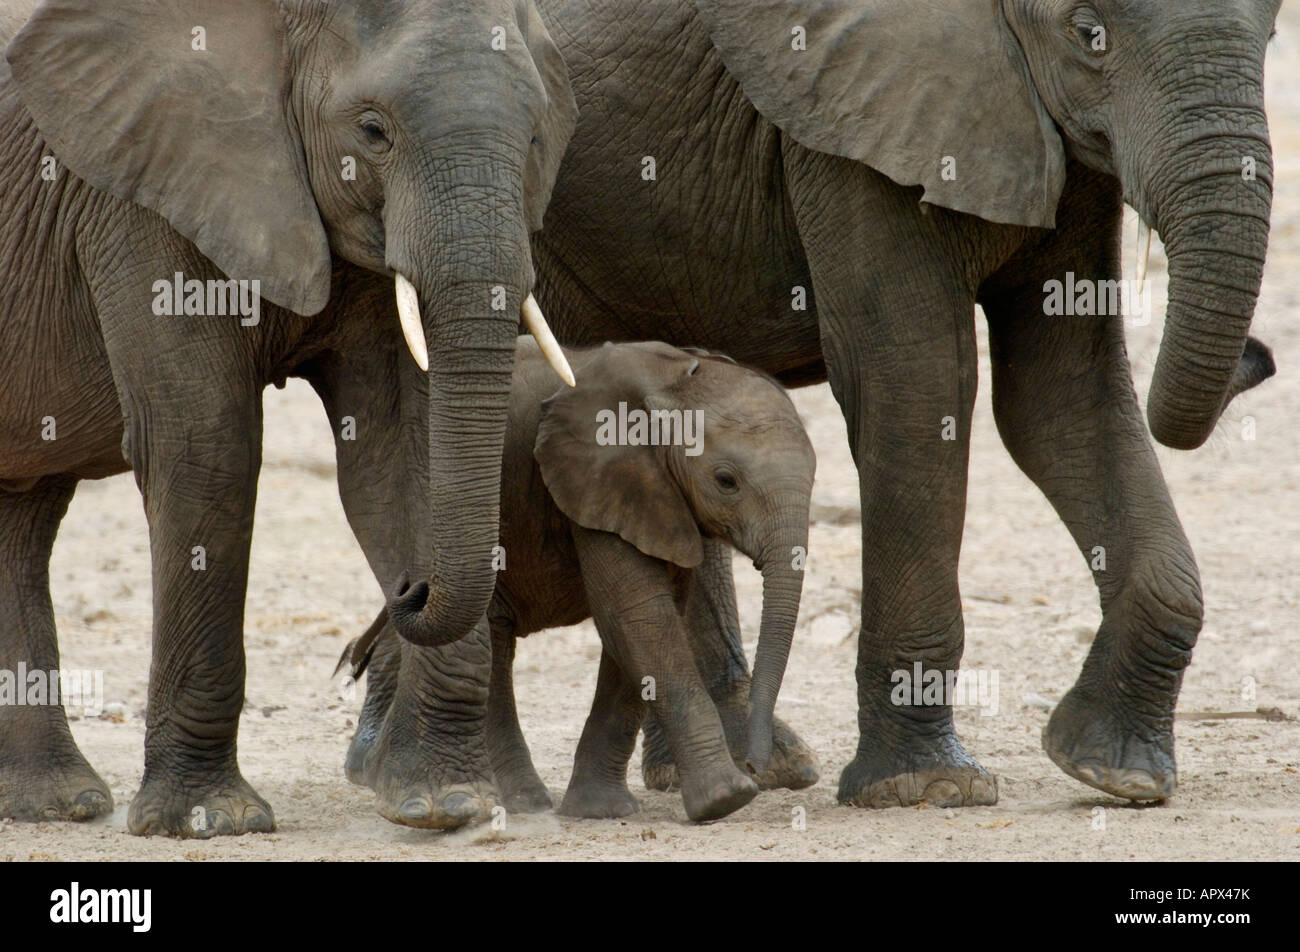 Elephant with two youngsters Stock Photo